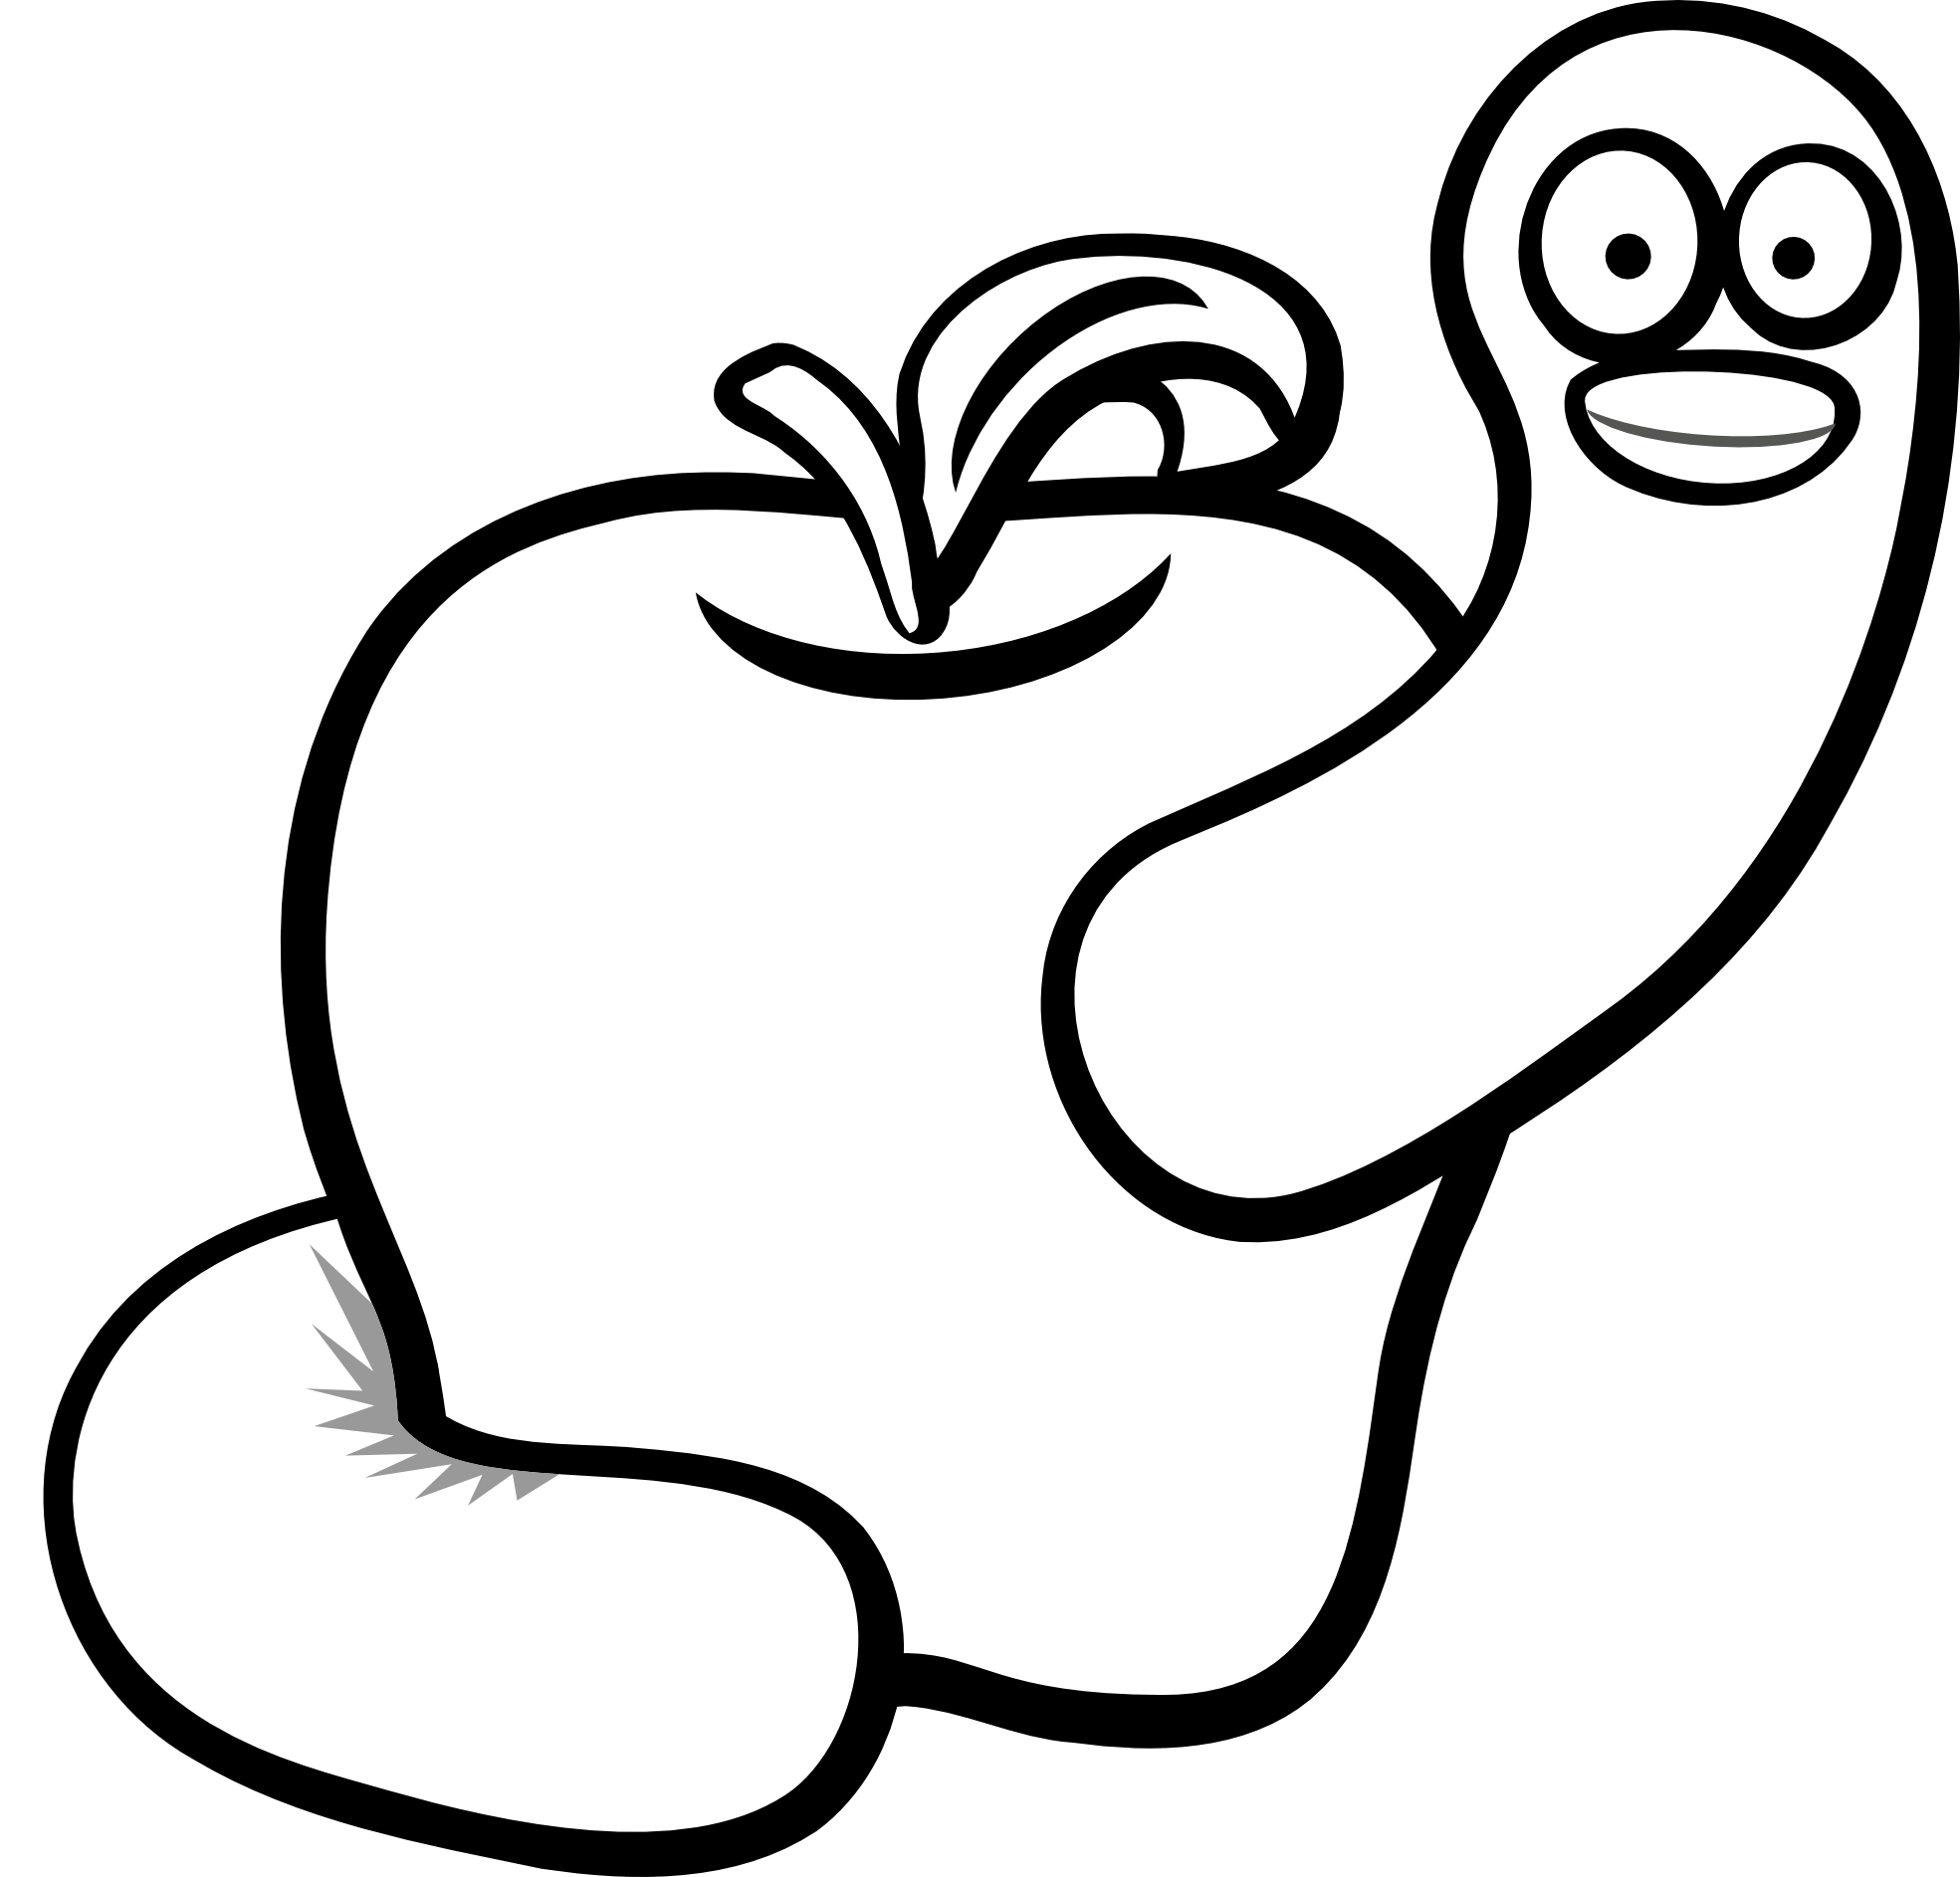 Pix For > Worms Clipart Black And White